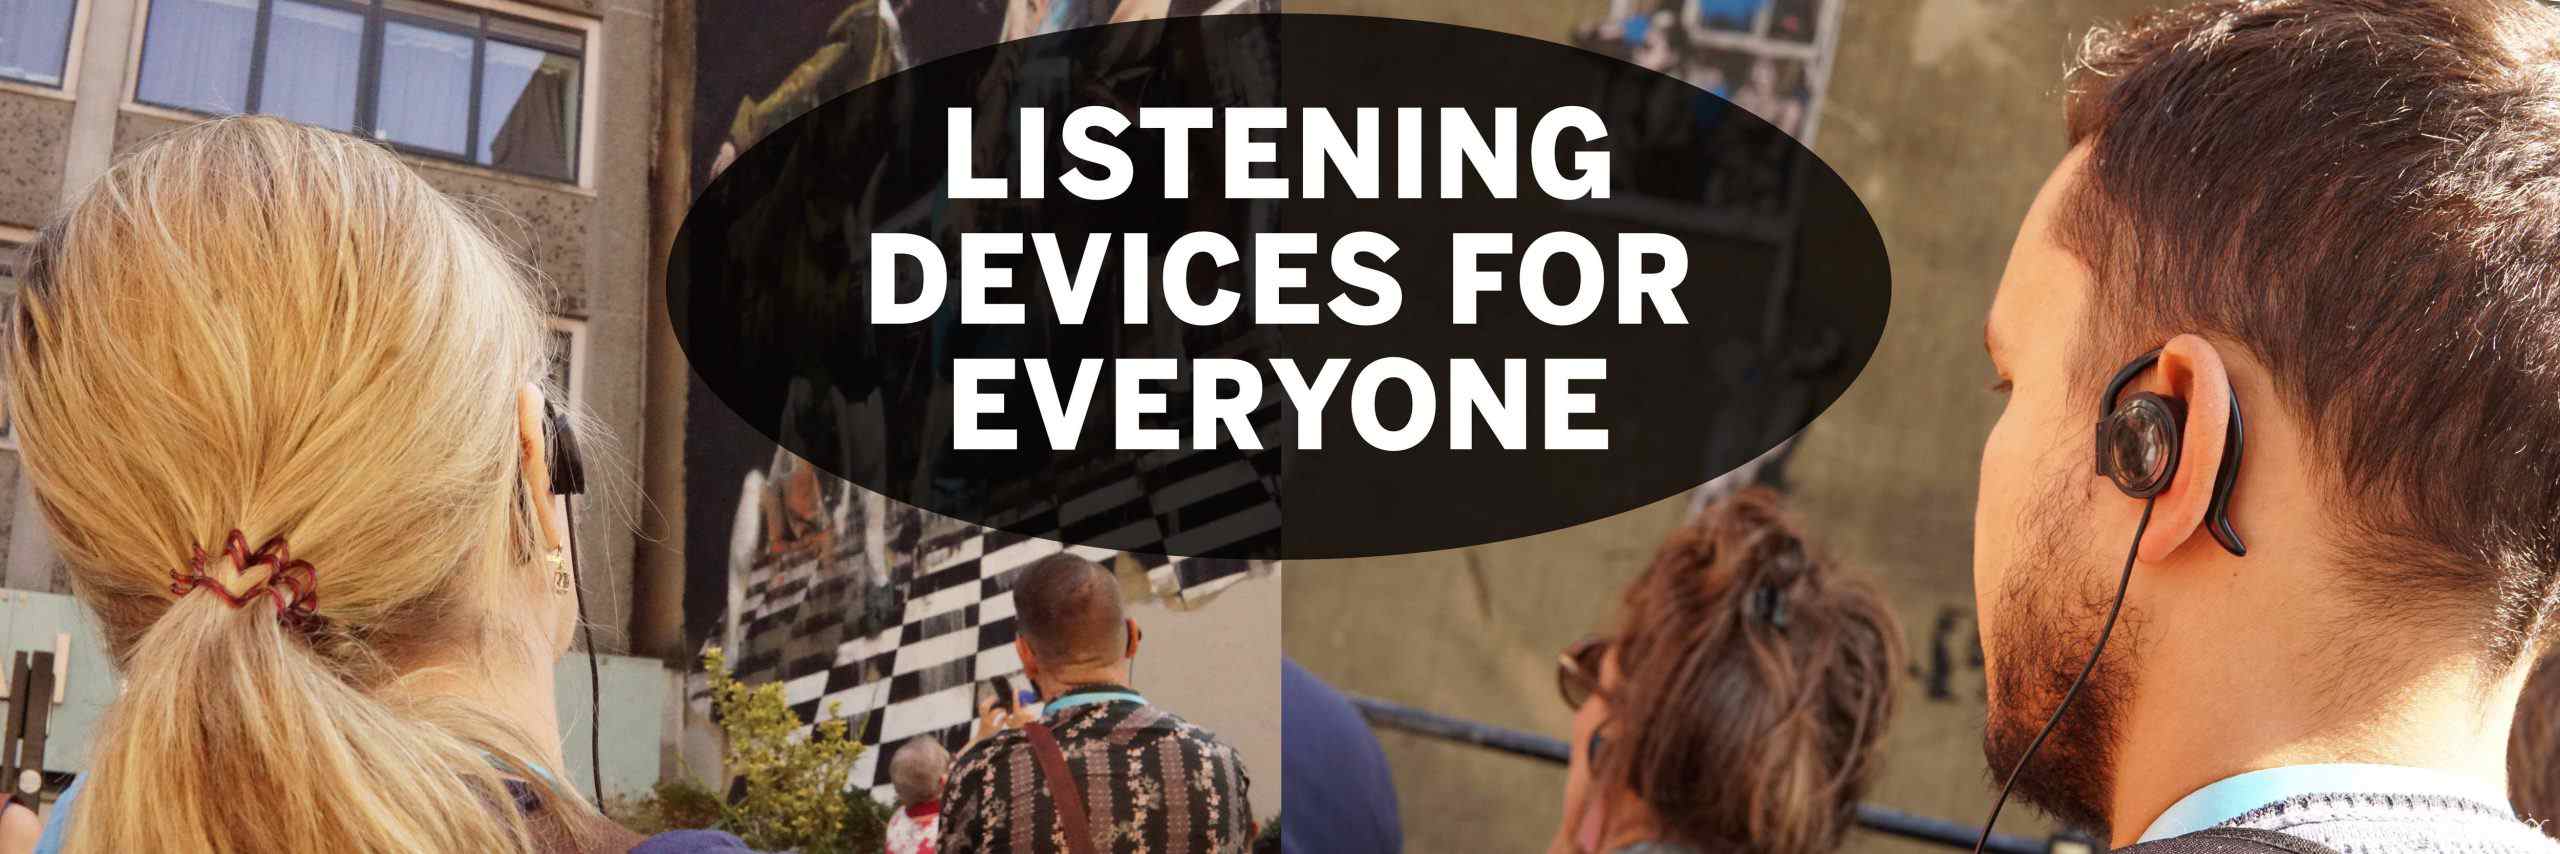 Listening Devices Enhance The Experience